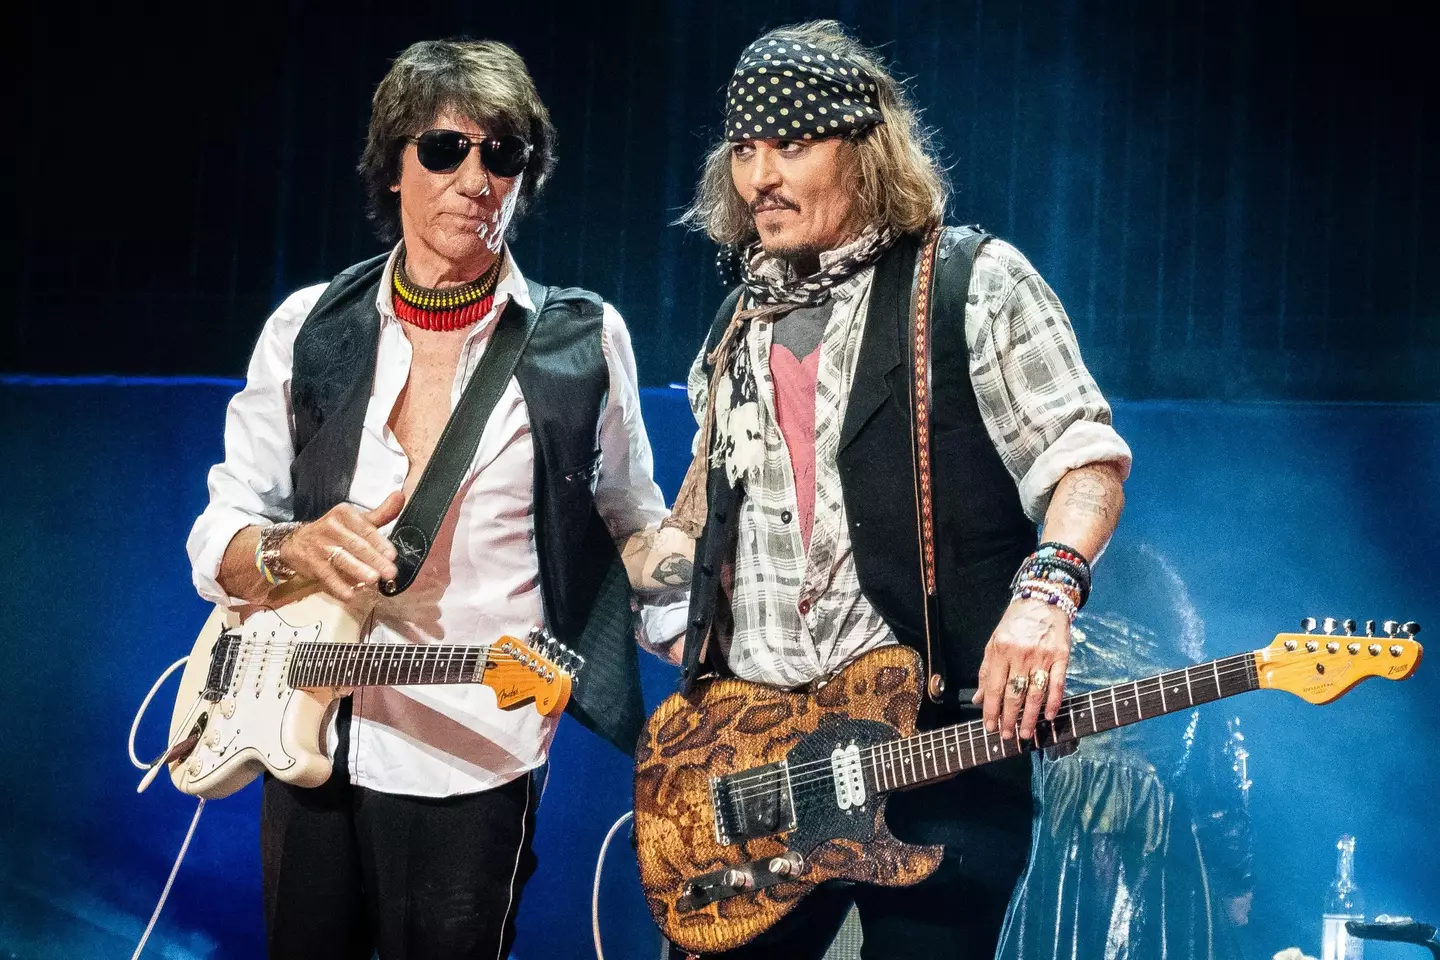 Depp is currently on tour in the UK with Jeff Beck.